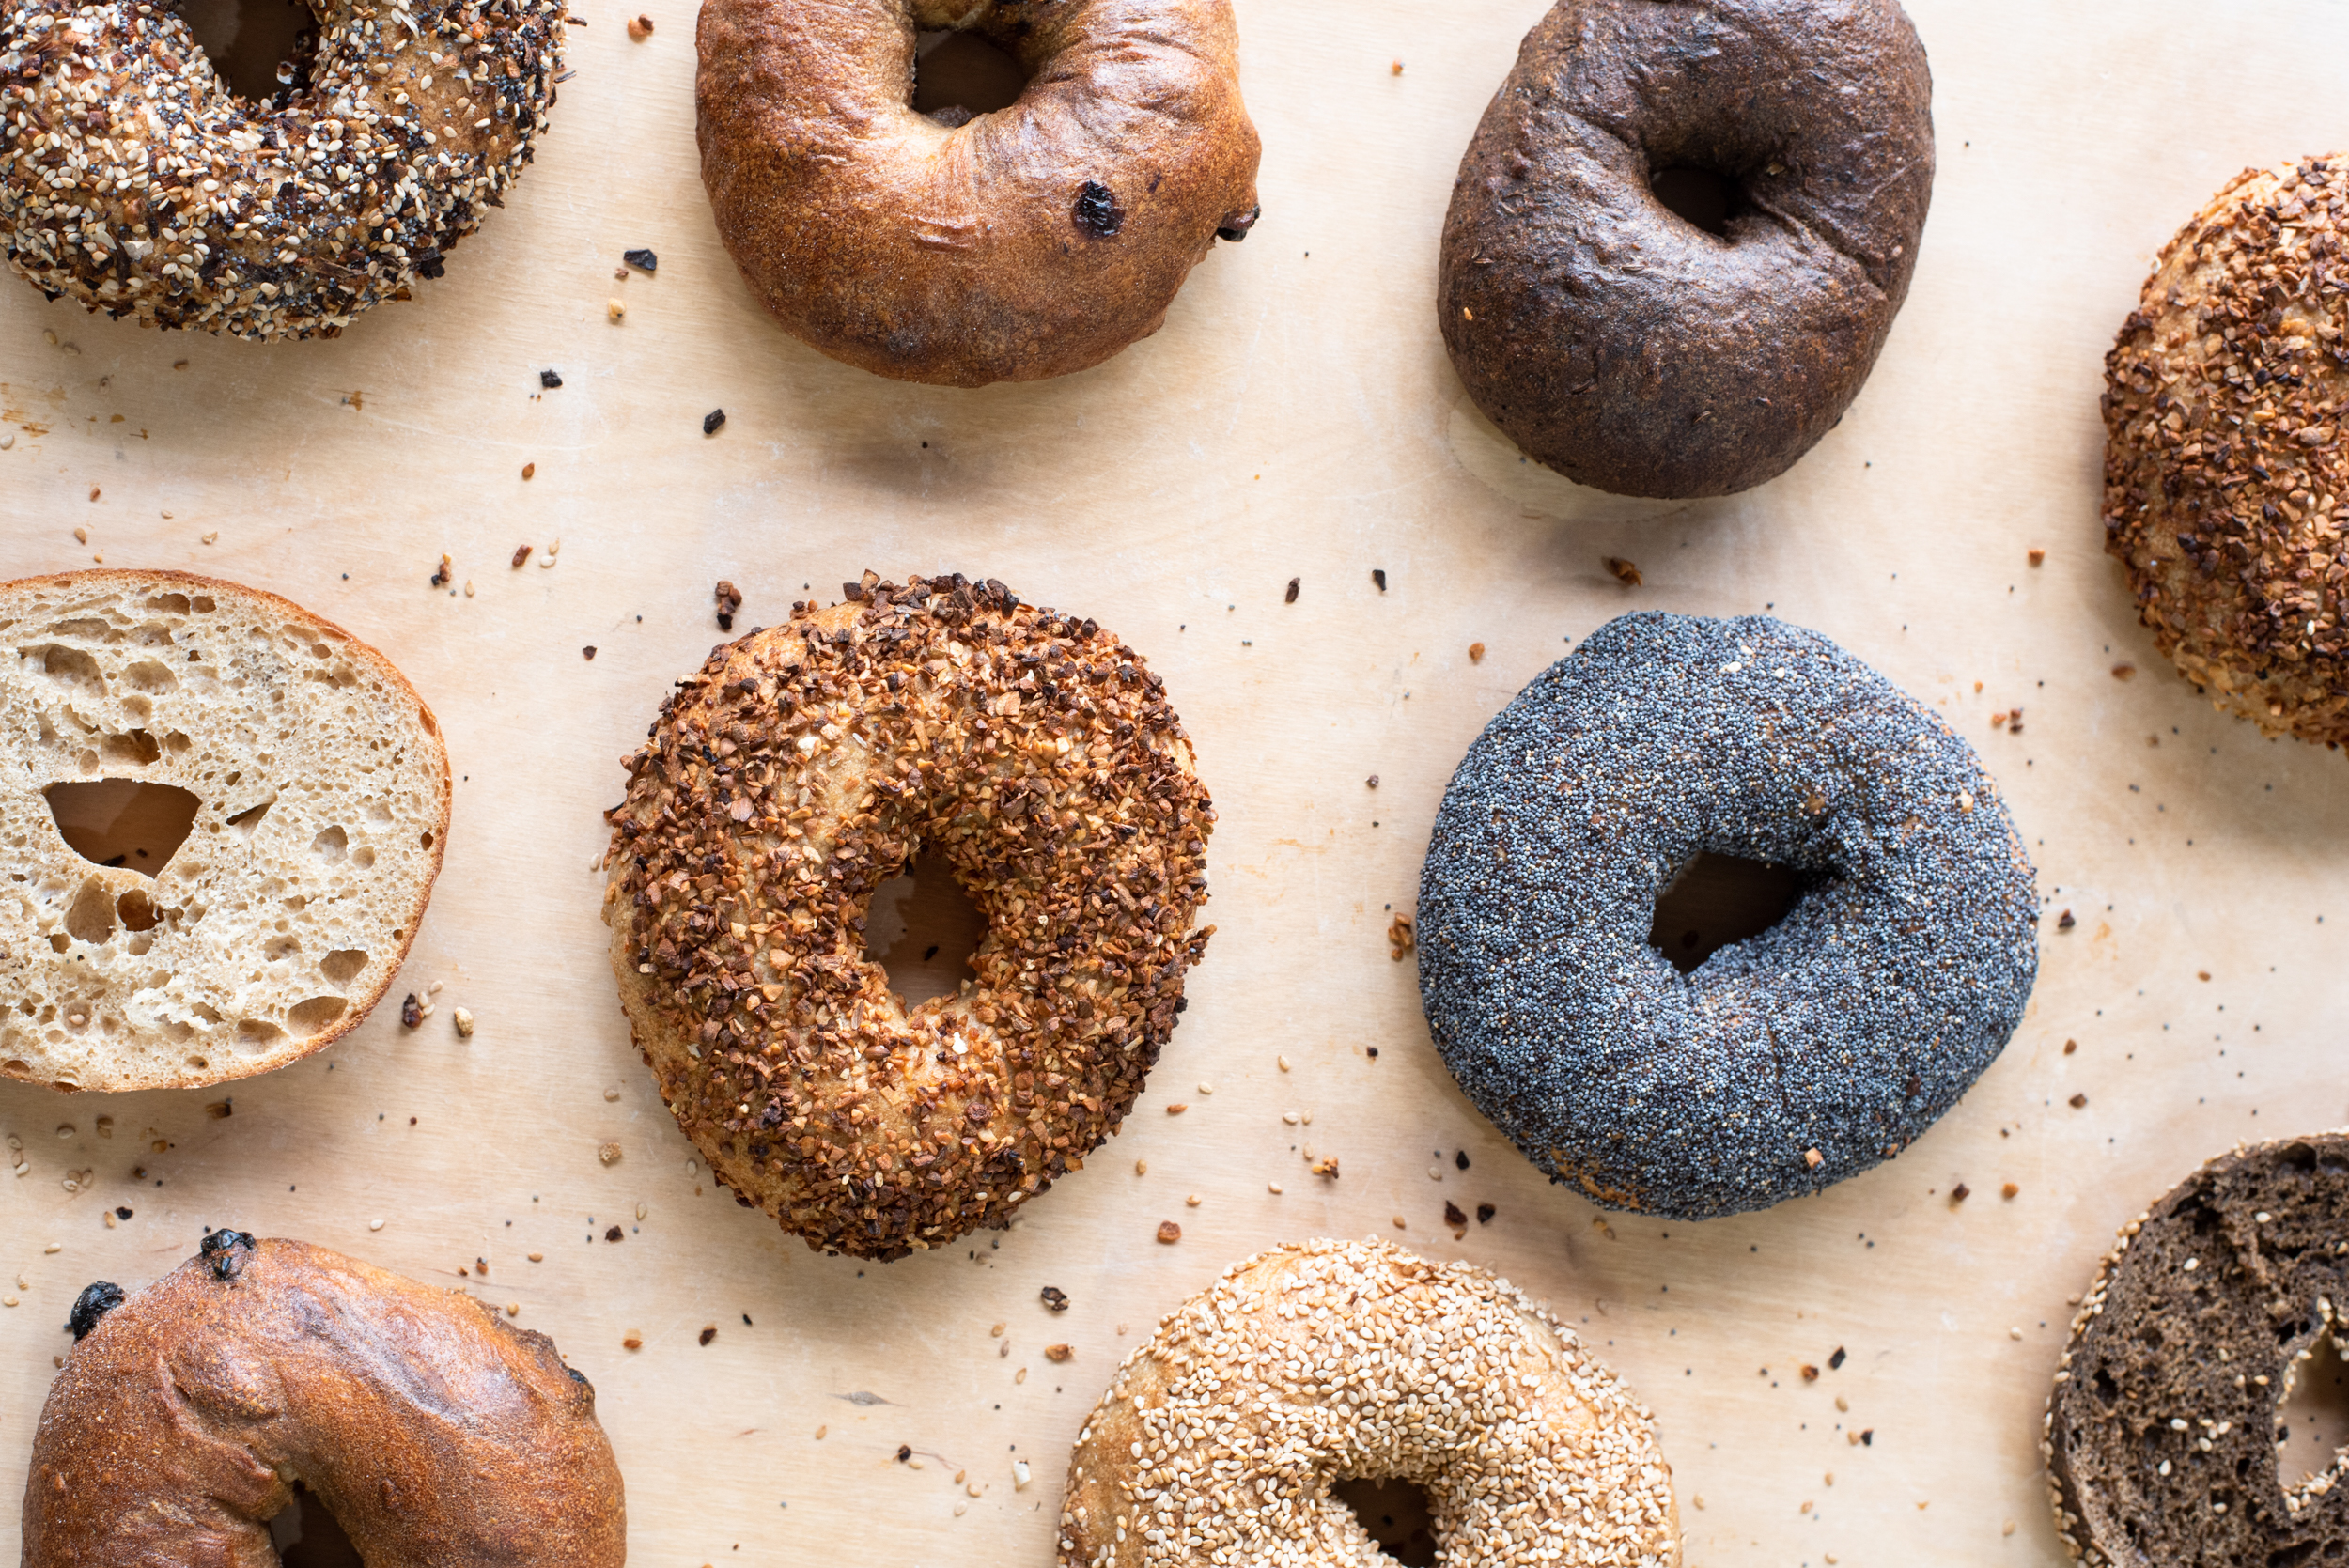 Midnite Bagel Feels Right at Home in Its New Sunset District Brick and Mortar Location